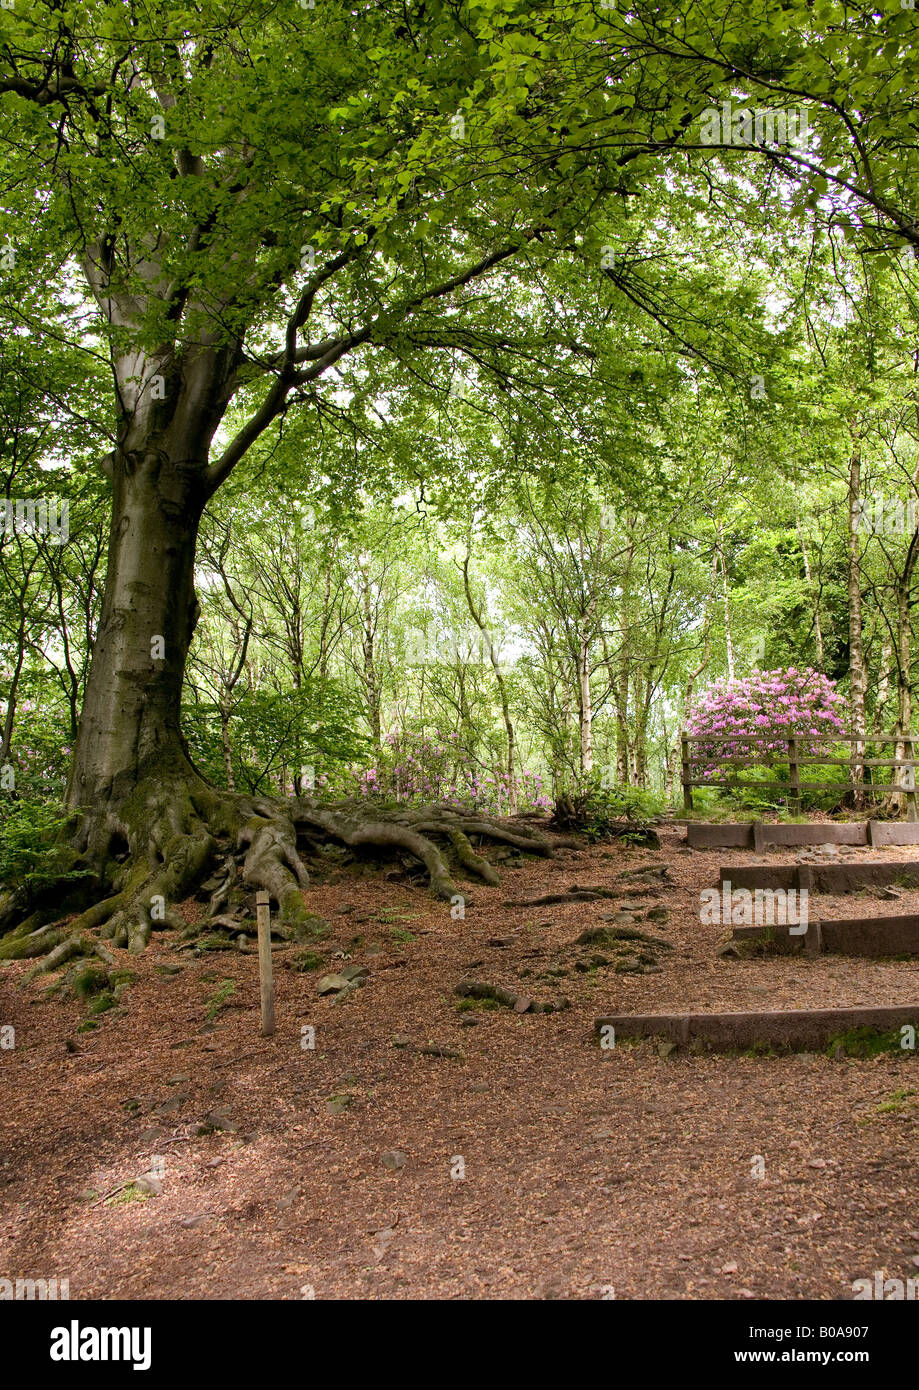 Summertime in Spring Wood, Whalley, Clitheroe, Lancashire, England. One of many managed woodland areas in The Ribble Valley. Stock Photo